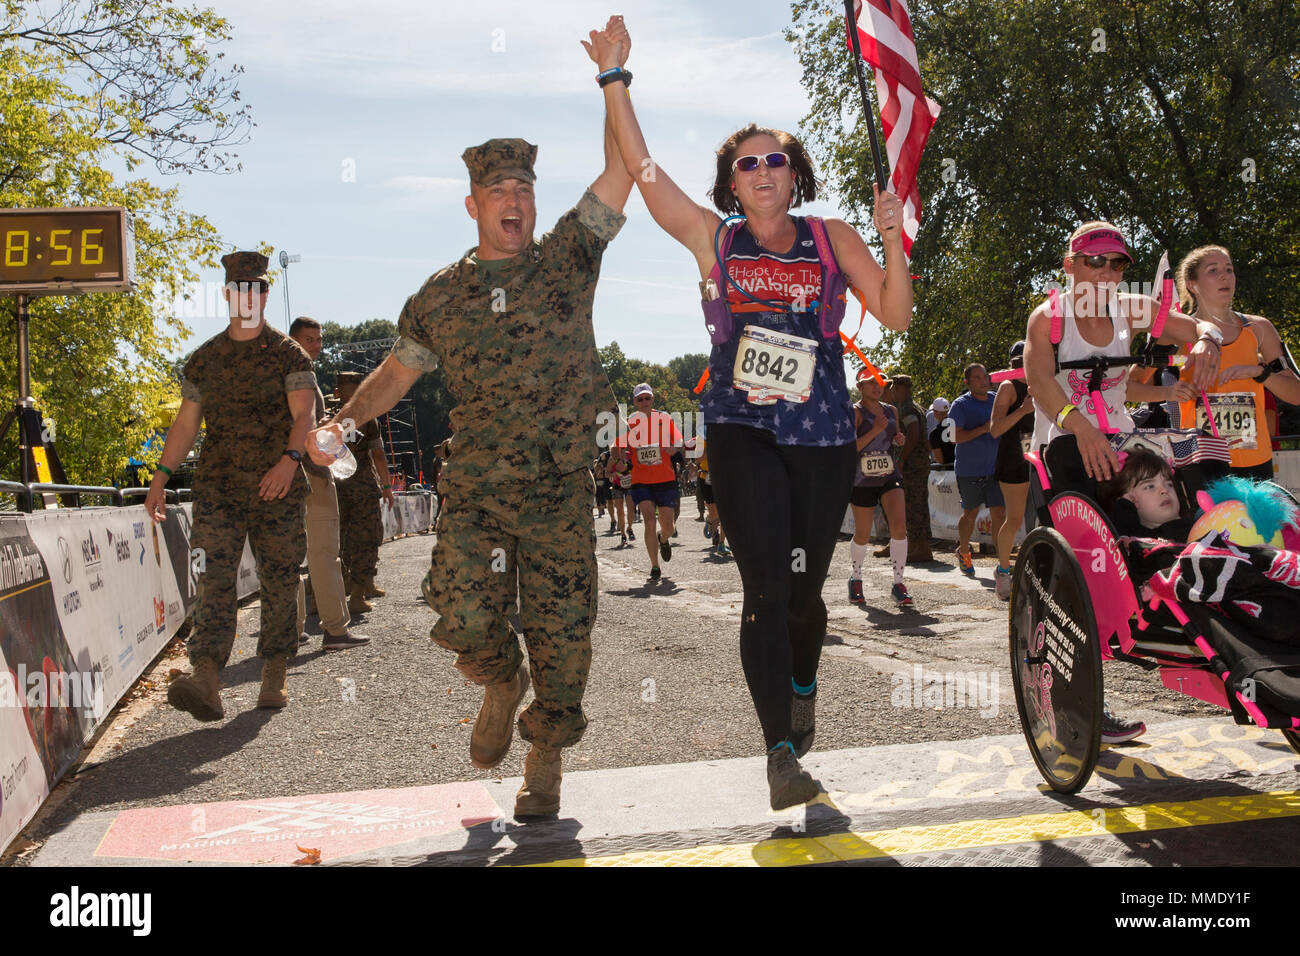 U.S. Marine Corps Col. Joseph M. Murray, base commander for Marine Corps Base Quantico, and Amanda Eason, a native of Quantico, Virginia, cross the finish line of the 42nd annual running of the Marine Corps Marathon, traveling on a monumental course through Washington, D.C. and finishing at the Marine Corps War Memorial, Arlington, Va., Oct. 22, 2017. Also known as 'The People's Marathon,' the 26.2 mile race drew roughly 30,000 participants to promote physical fitness, generate goodwill in the community, and showcase the organizational skills of the Marine Corps. (U.S. Marine Corps photo by La Stock Photo